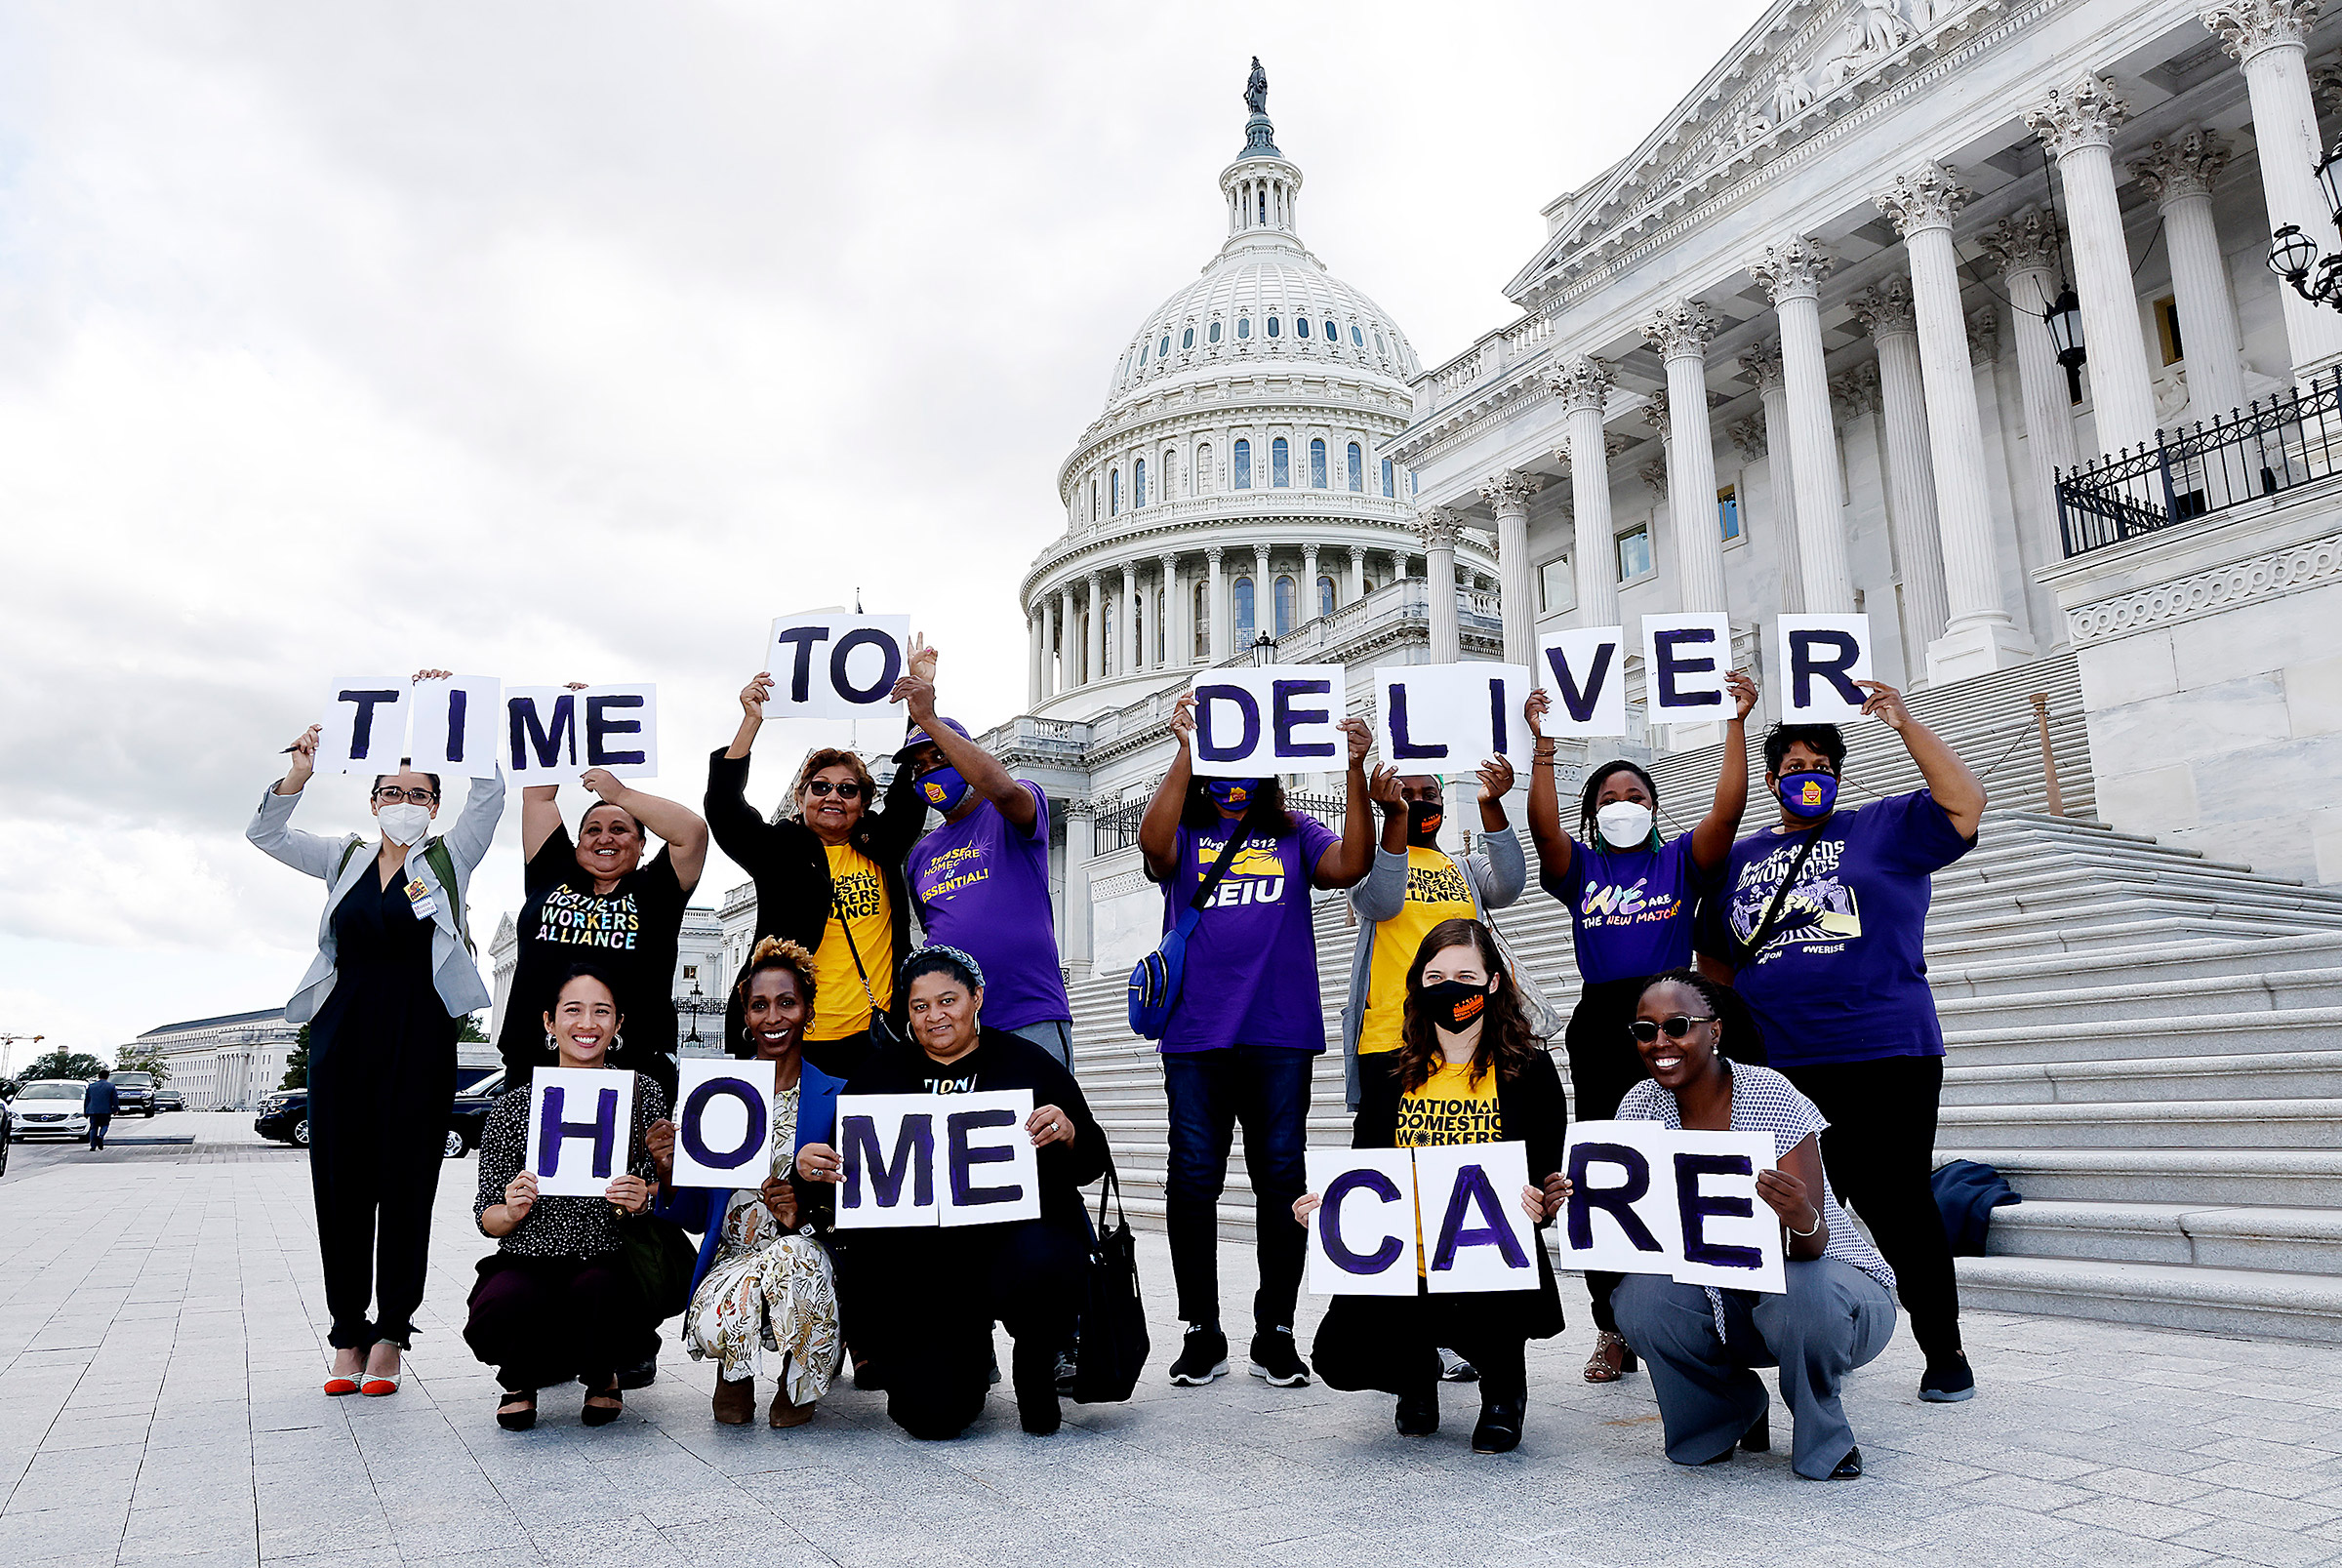 Advocates rally for the Time To Deliver Home Care as part of Build Back Better Act at the Capitol Building in Washington, D.C., on Sept. 23, 2021. (Paul Morigi—Unbendable Media/Getty Images)